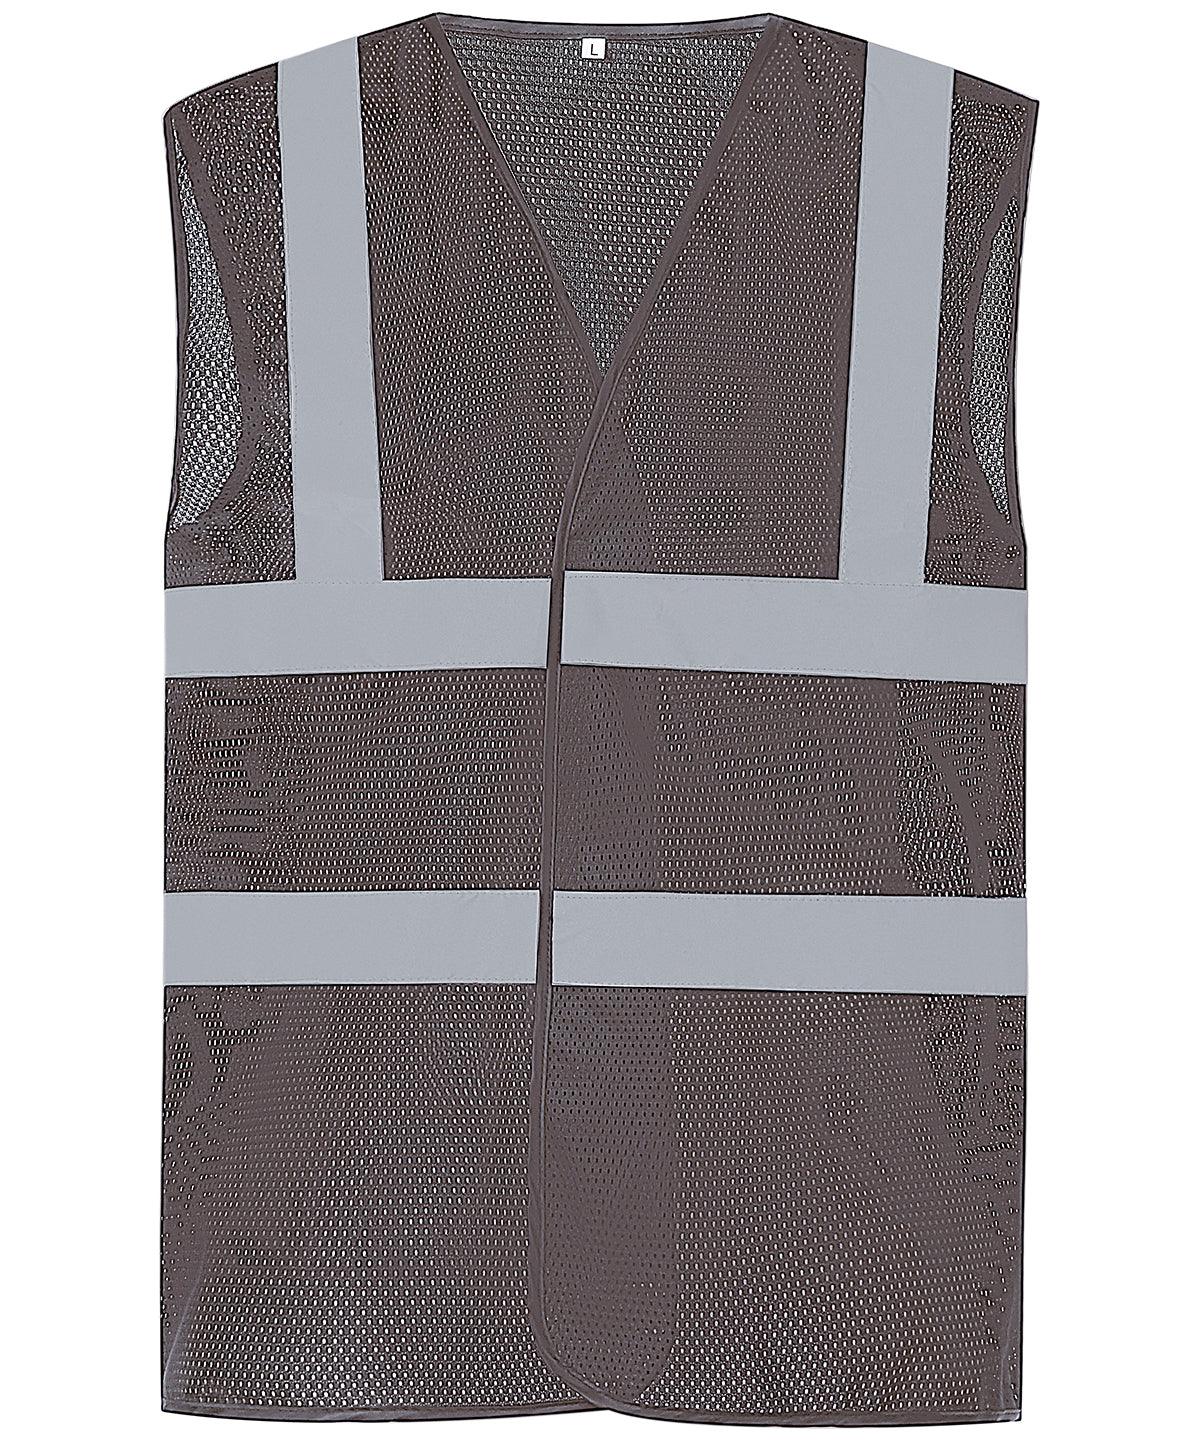 Grey - Top cool open mesh 2-band-and-braces waistcoat (HVW120) Safety Vests Yoko Plus Sizes, Safety Essentials, Safetywear, Workwear Schoolwear Centres